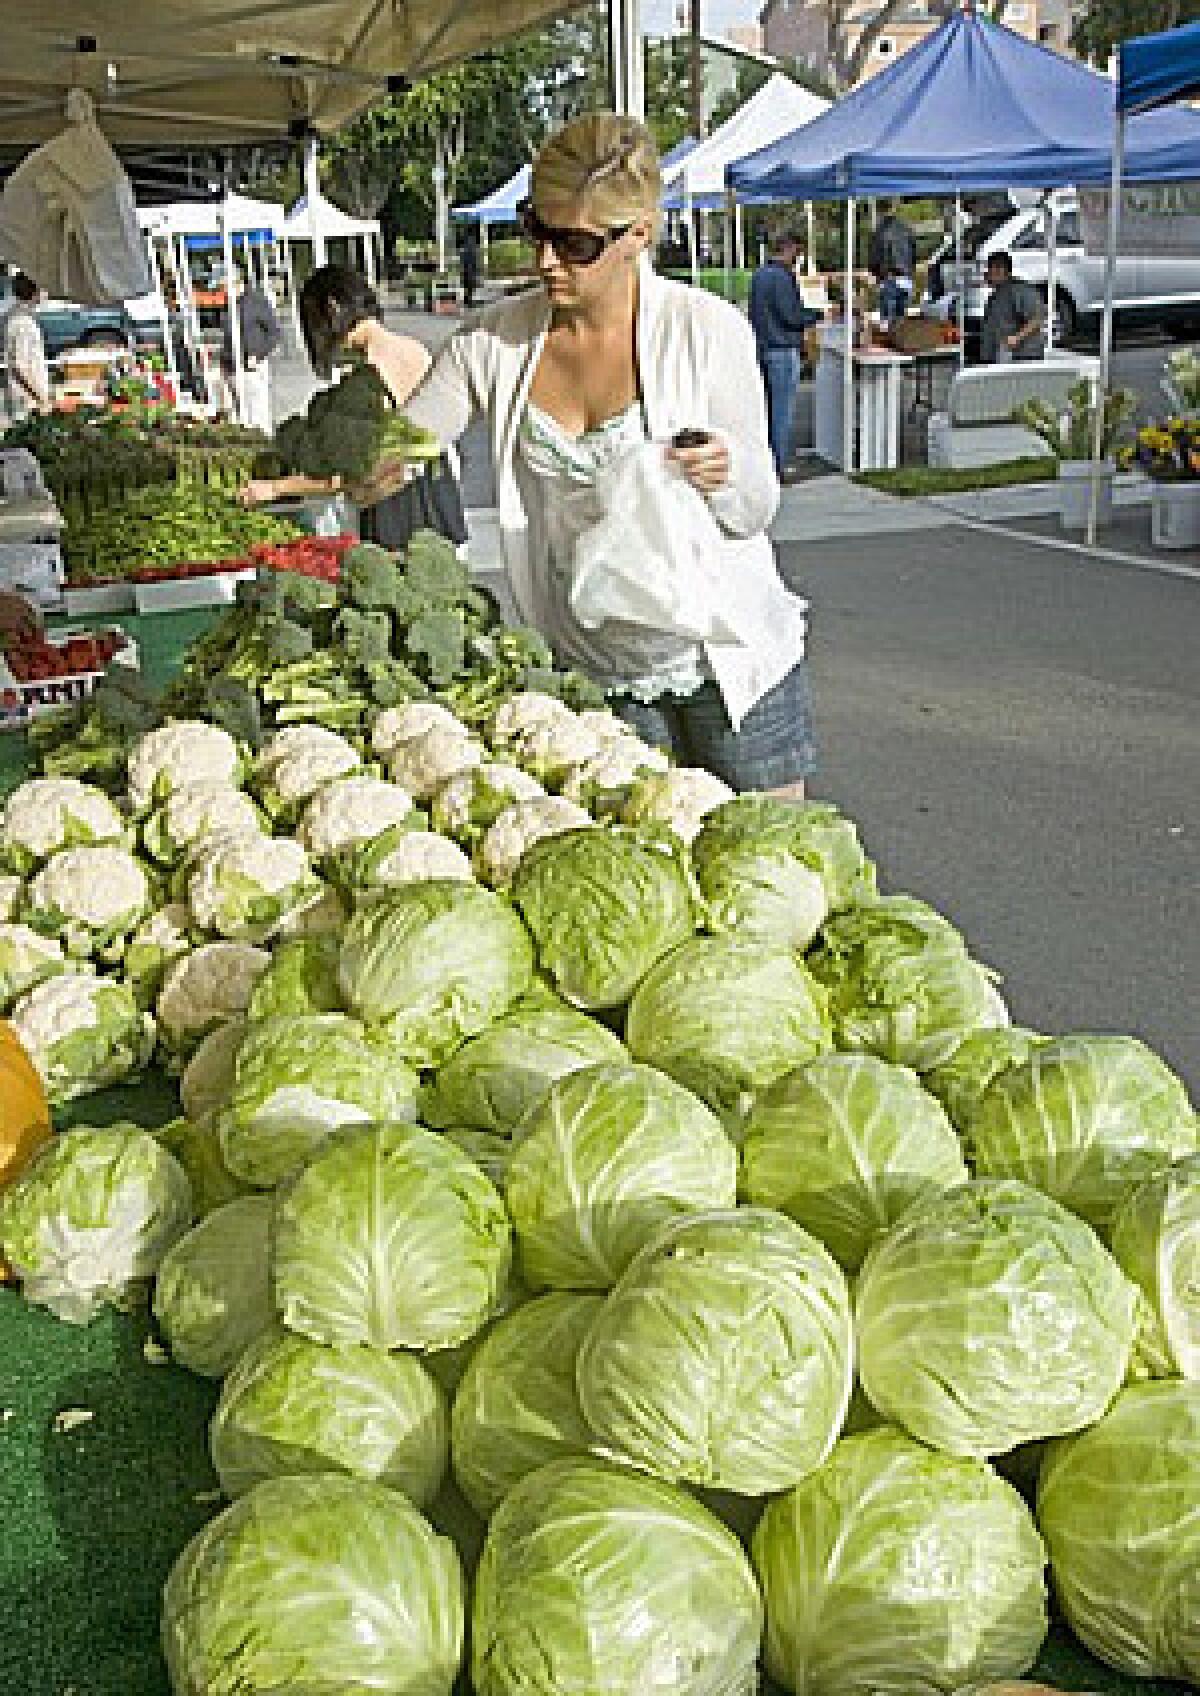 Smith Farms, which grows locally in Trabuco Canyon, Orange County, sells a wide range of vegetables, including green cabbage, iceberg lettuce, cauliflower and broccoli; at the Corona del Mar farmers market.